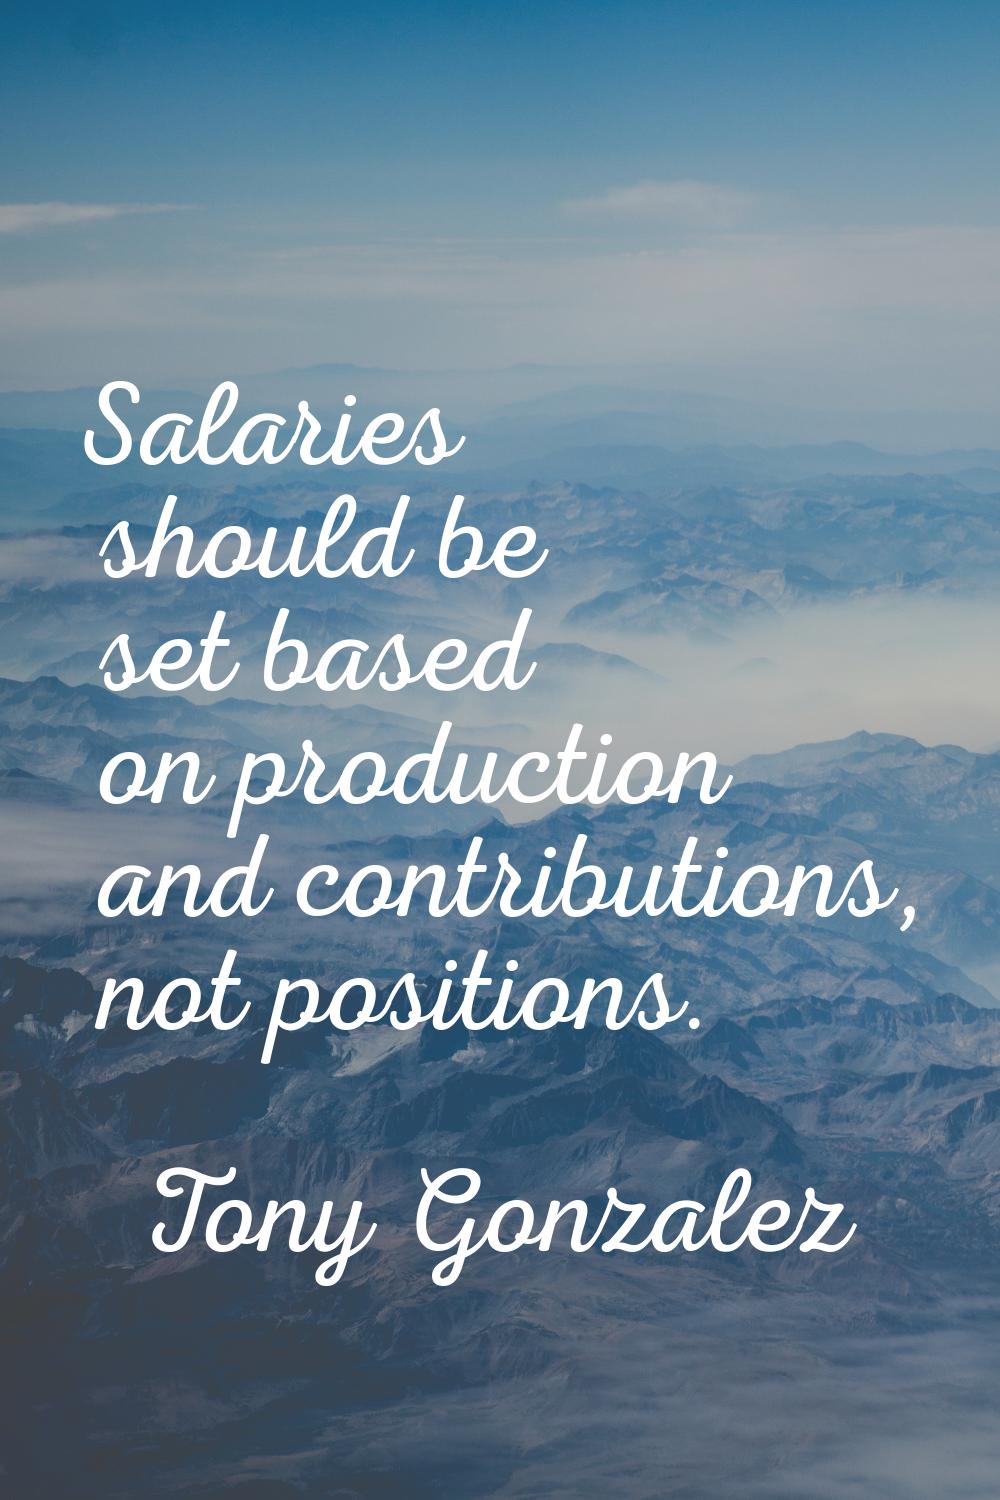 Salaries should be set based on production and contributions, not positions.